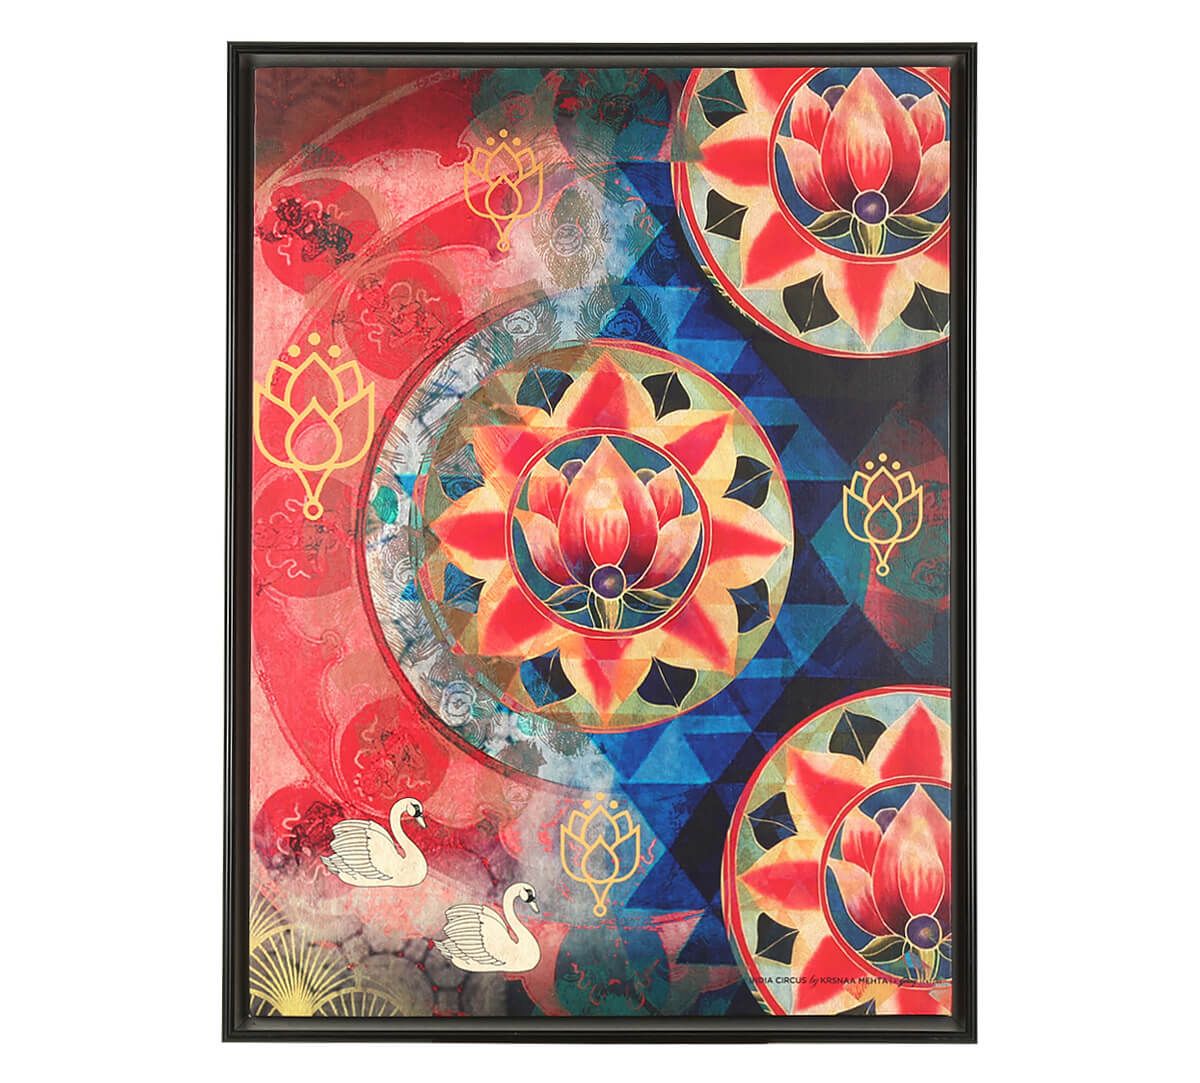 India Circus by Krsnaa Mehta Picturesque Fairy Tale Floating Framed Canvas Wall Art